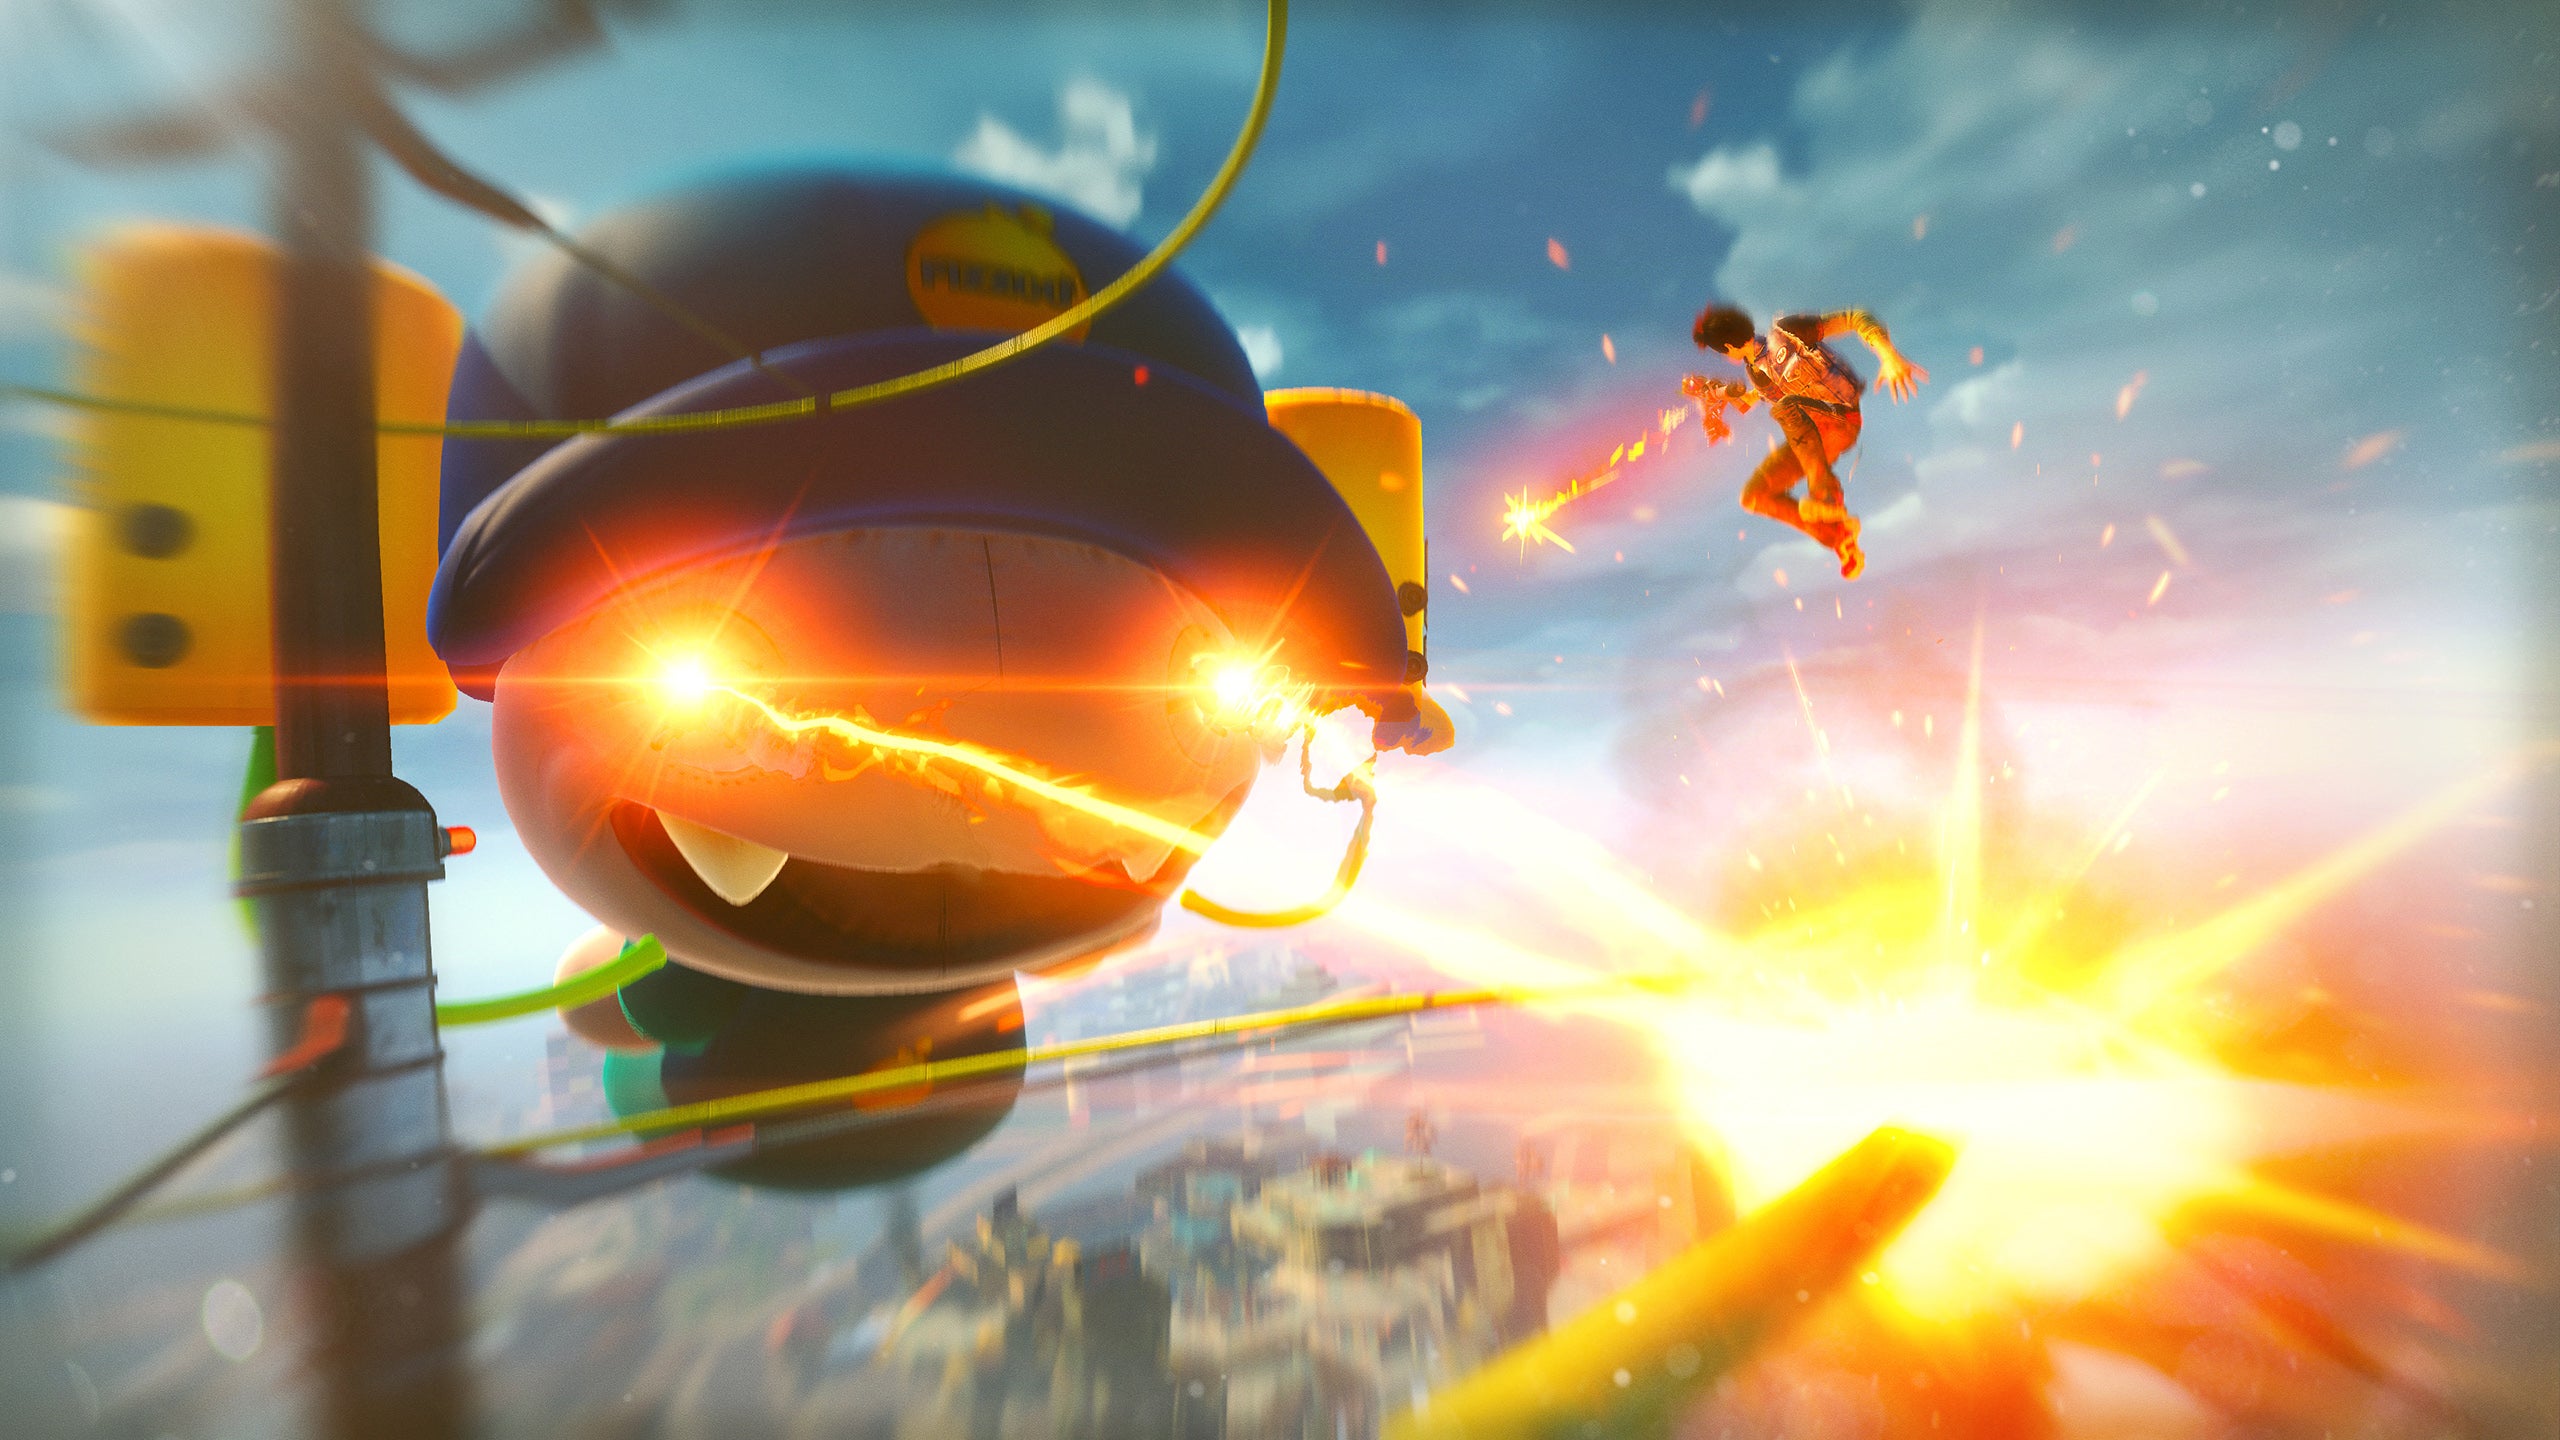 Sunset Overdrive's crazy style is a gleeful blend of Tony Hawk Pro Skater  and combat (review)